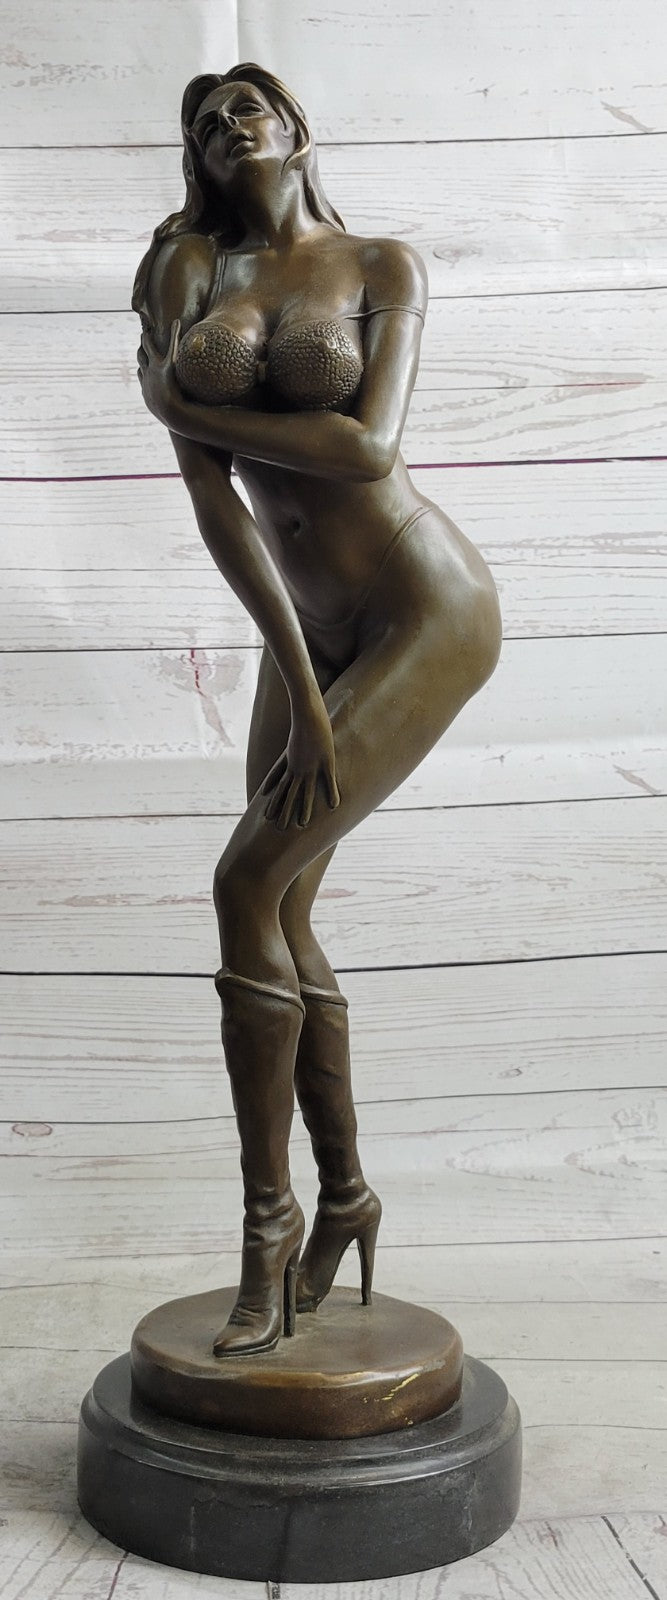 Provocative Vitaleh Bronze Figurine: Sexy Woman with Bikini and Boots, Signed Hot Cast Sculpture